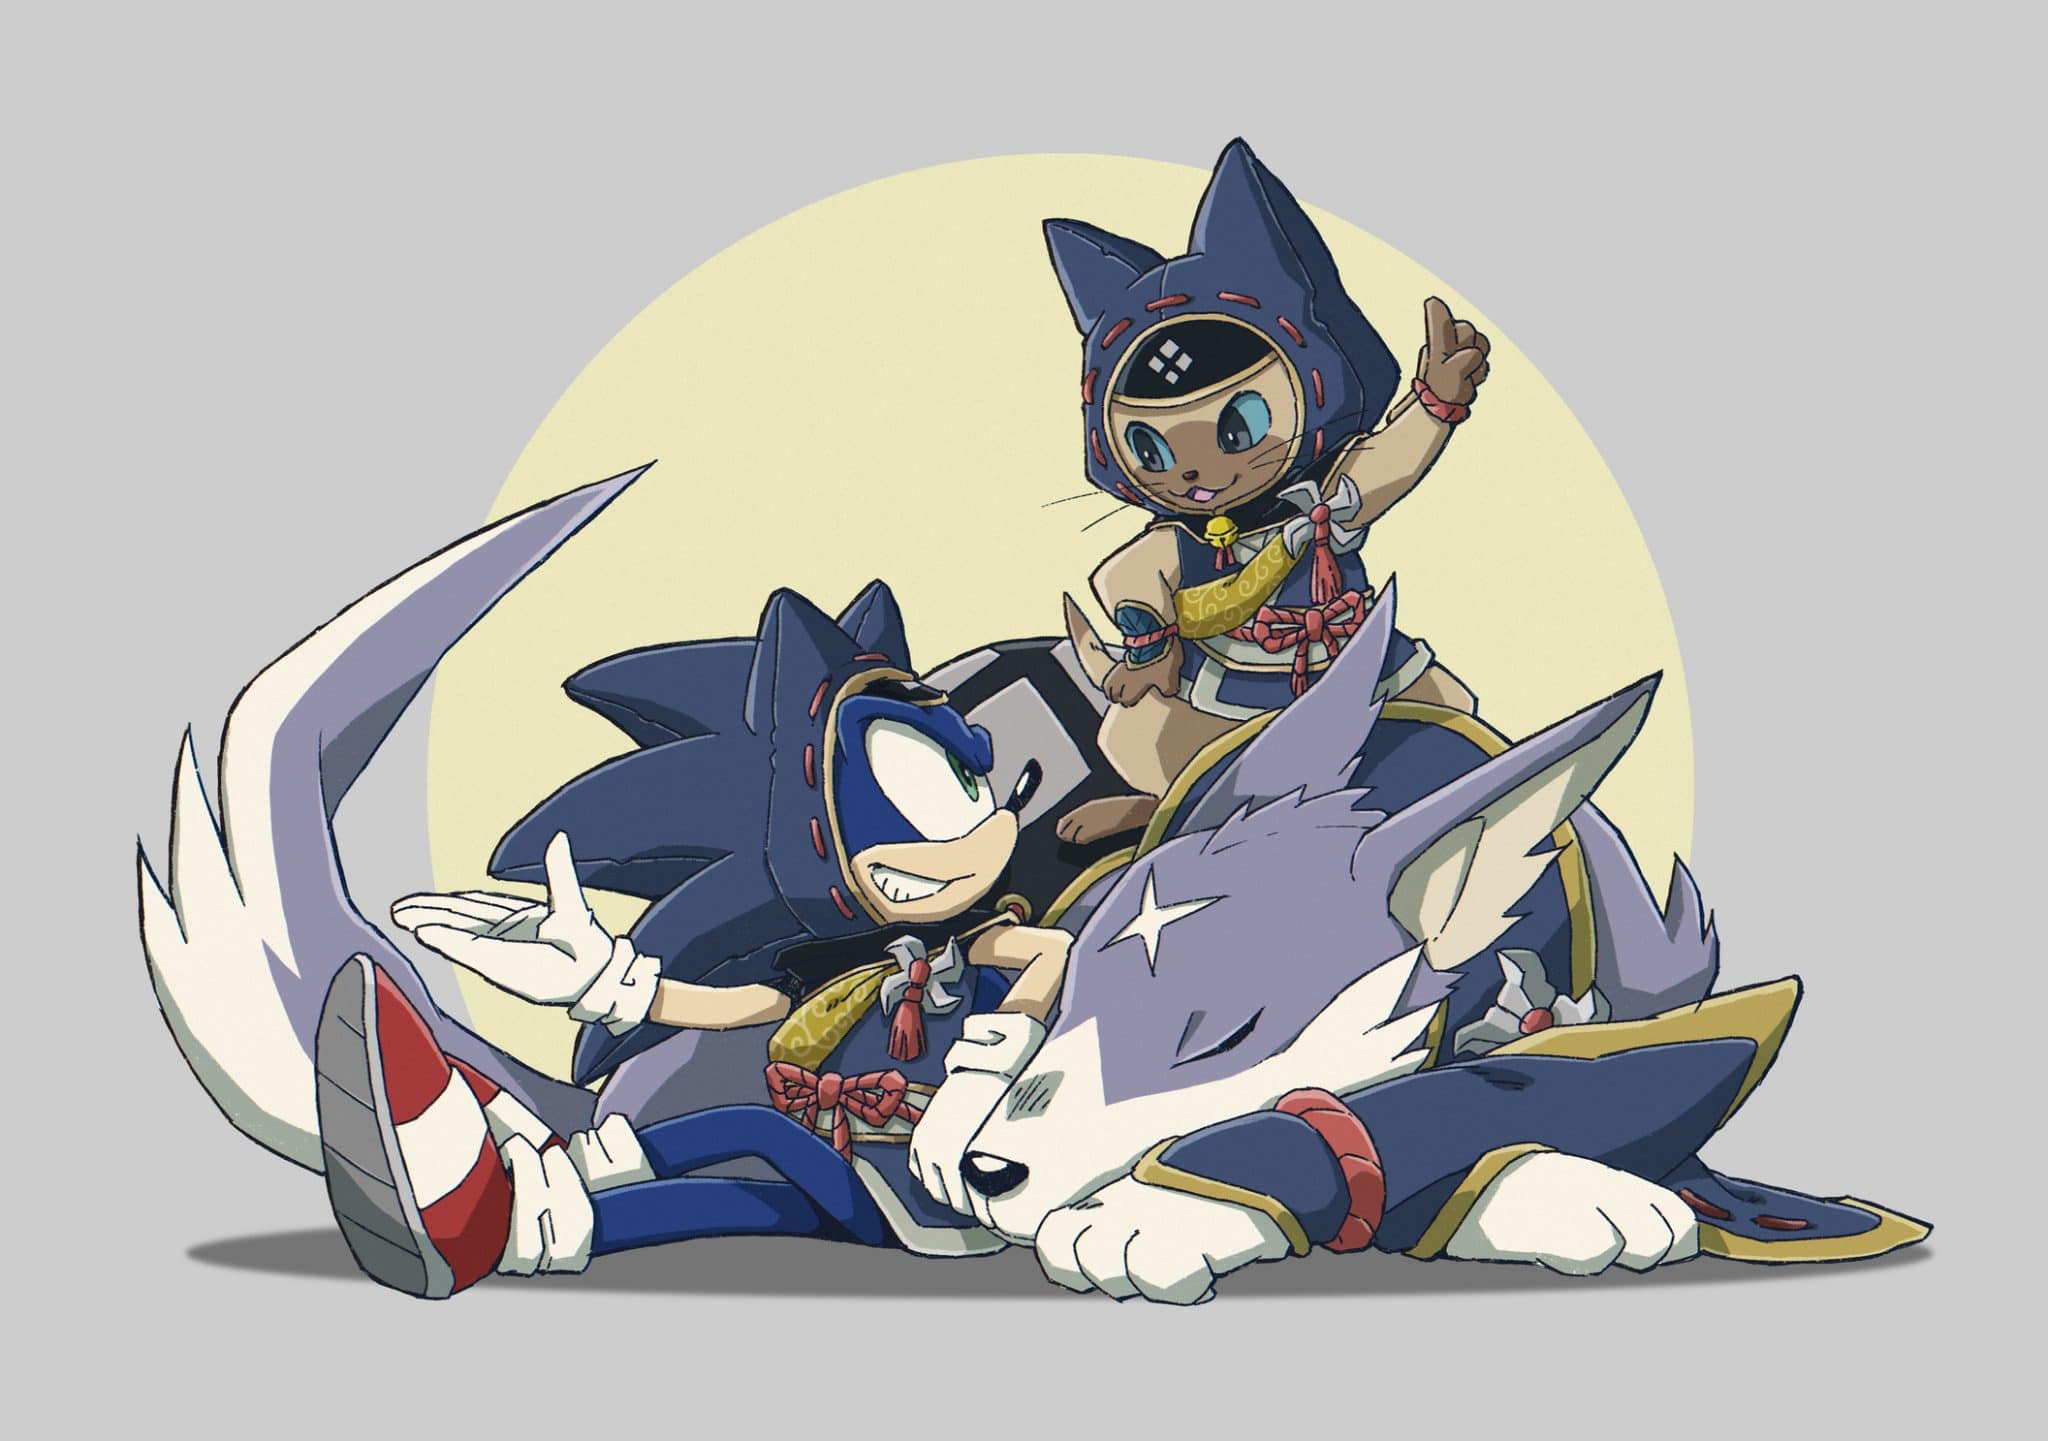 Monster Hunter Rise Shares 2 New Sonic The Hedgehog Illustrations Commemorating Collaboration